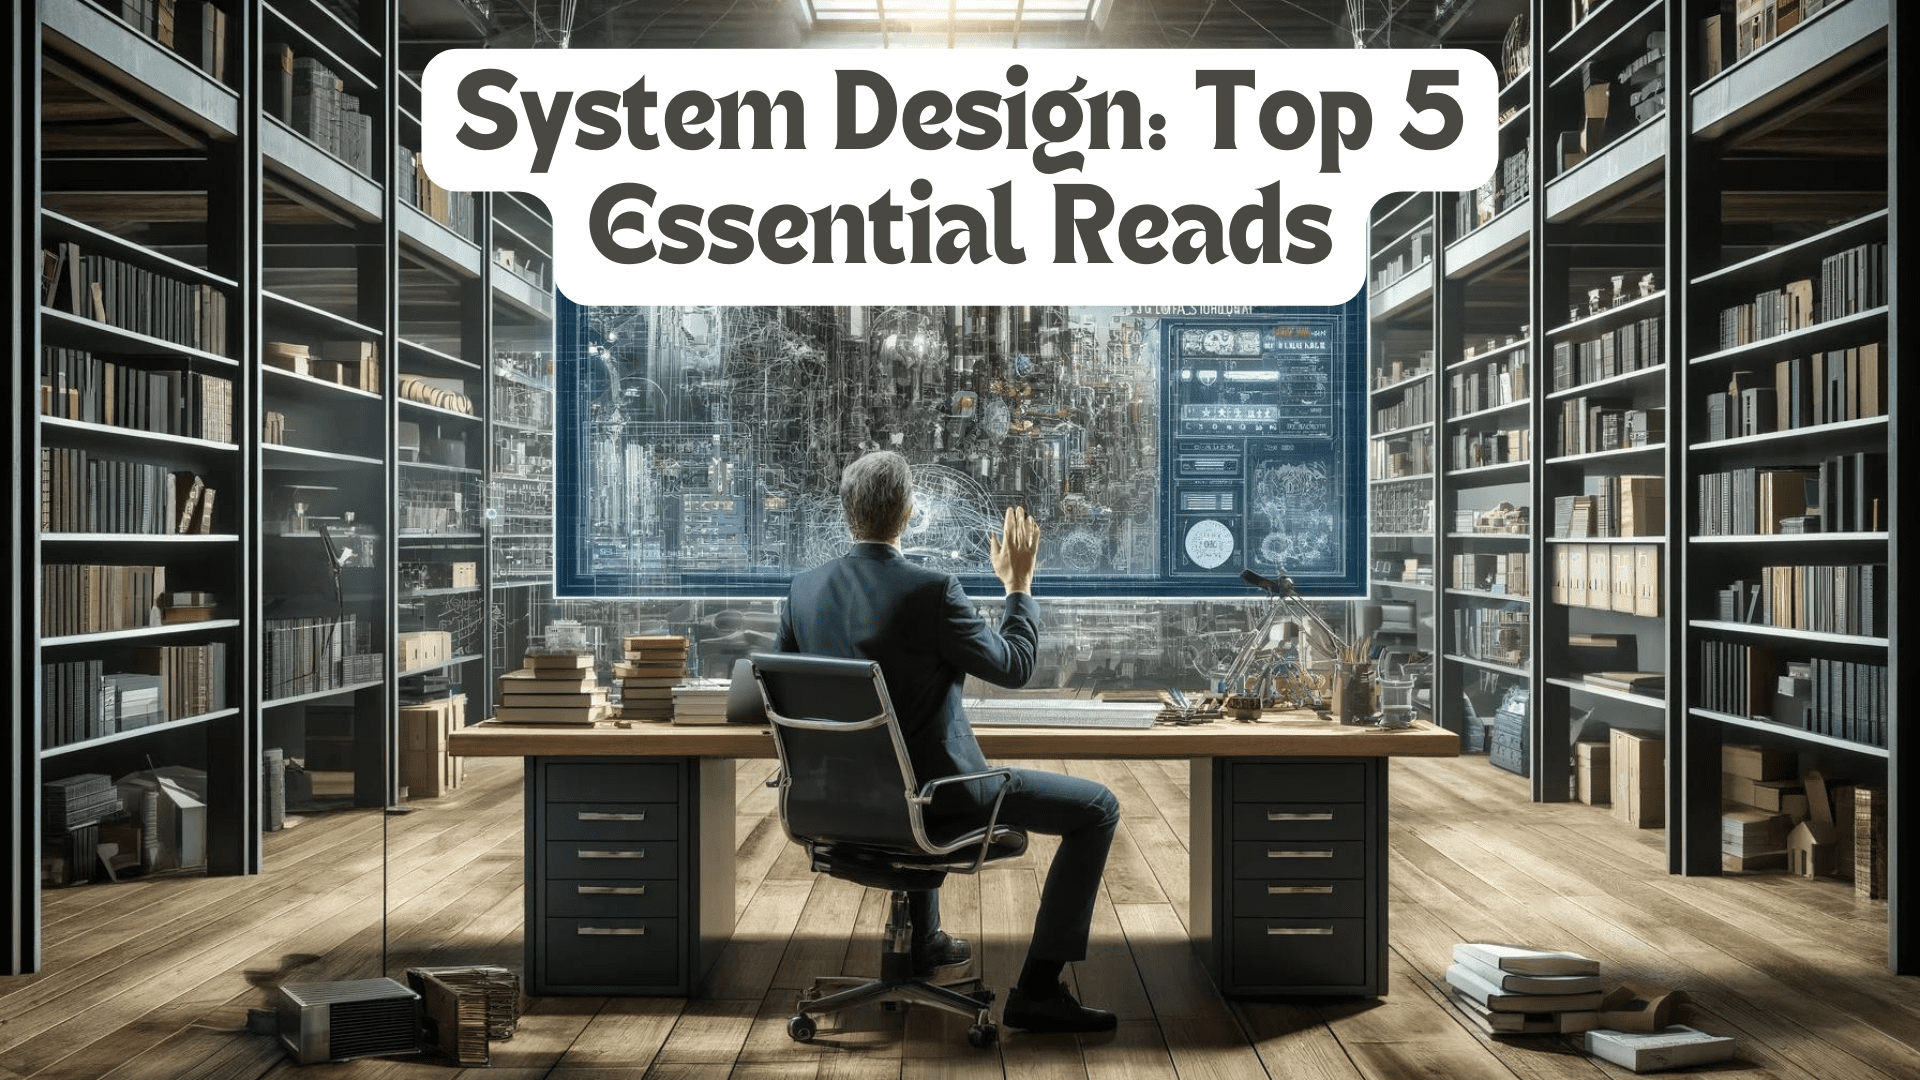 Learning System Design: Top 5 Essential Reads